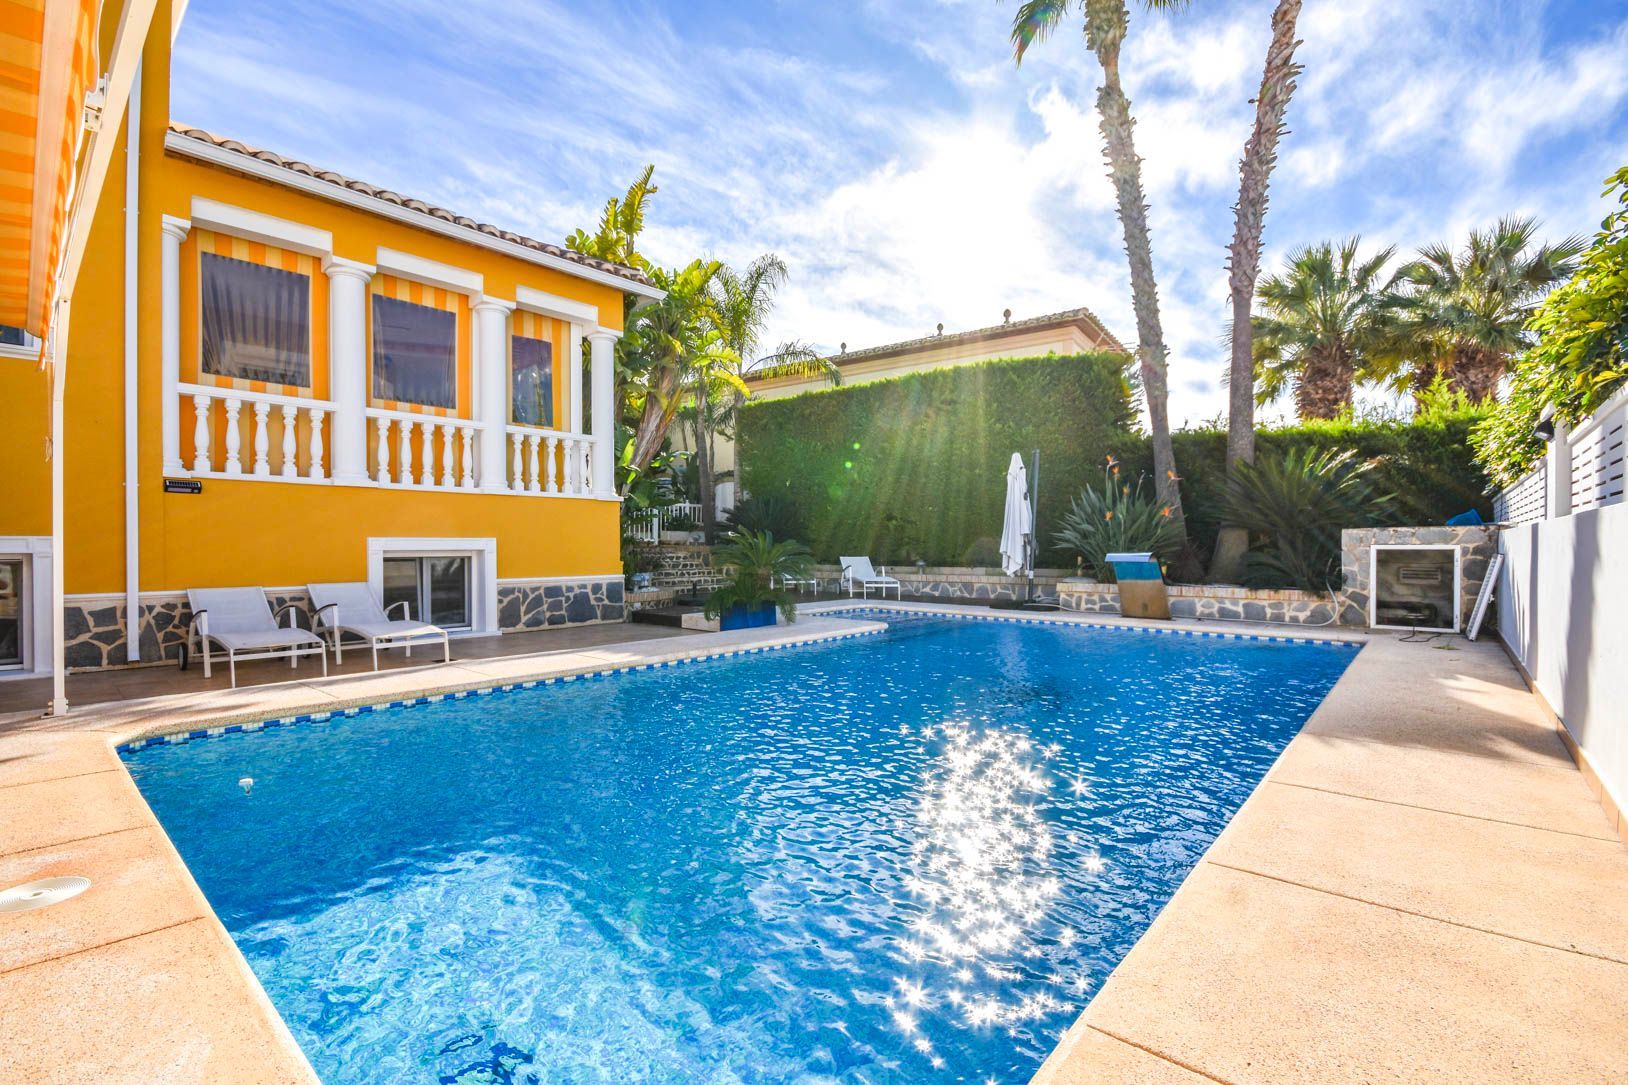 MAGNIFICENT DETACHED VILLA 600 METRES FROM THE BEACH